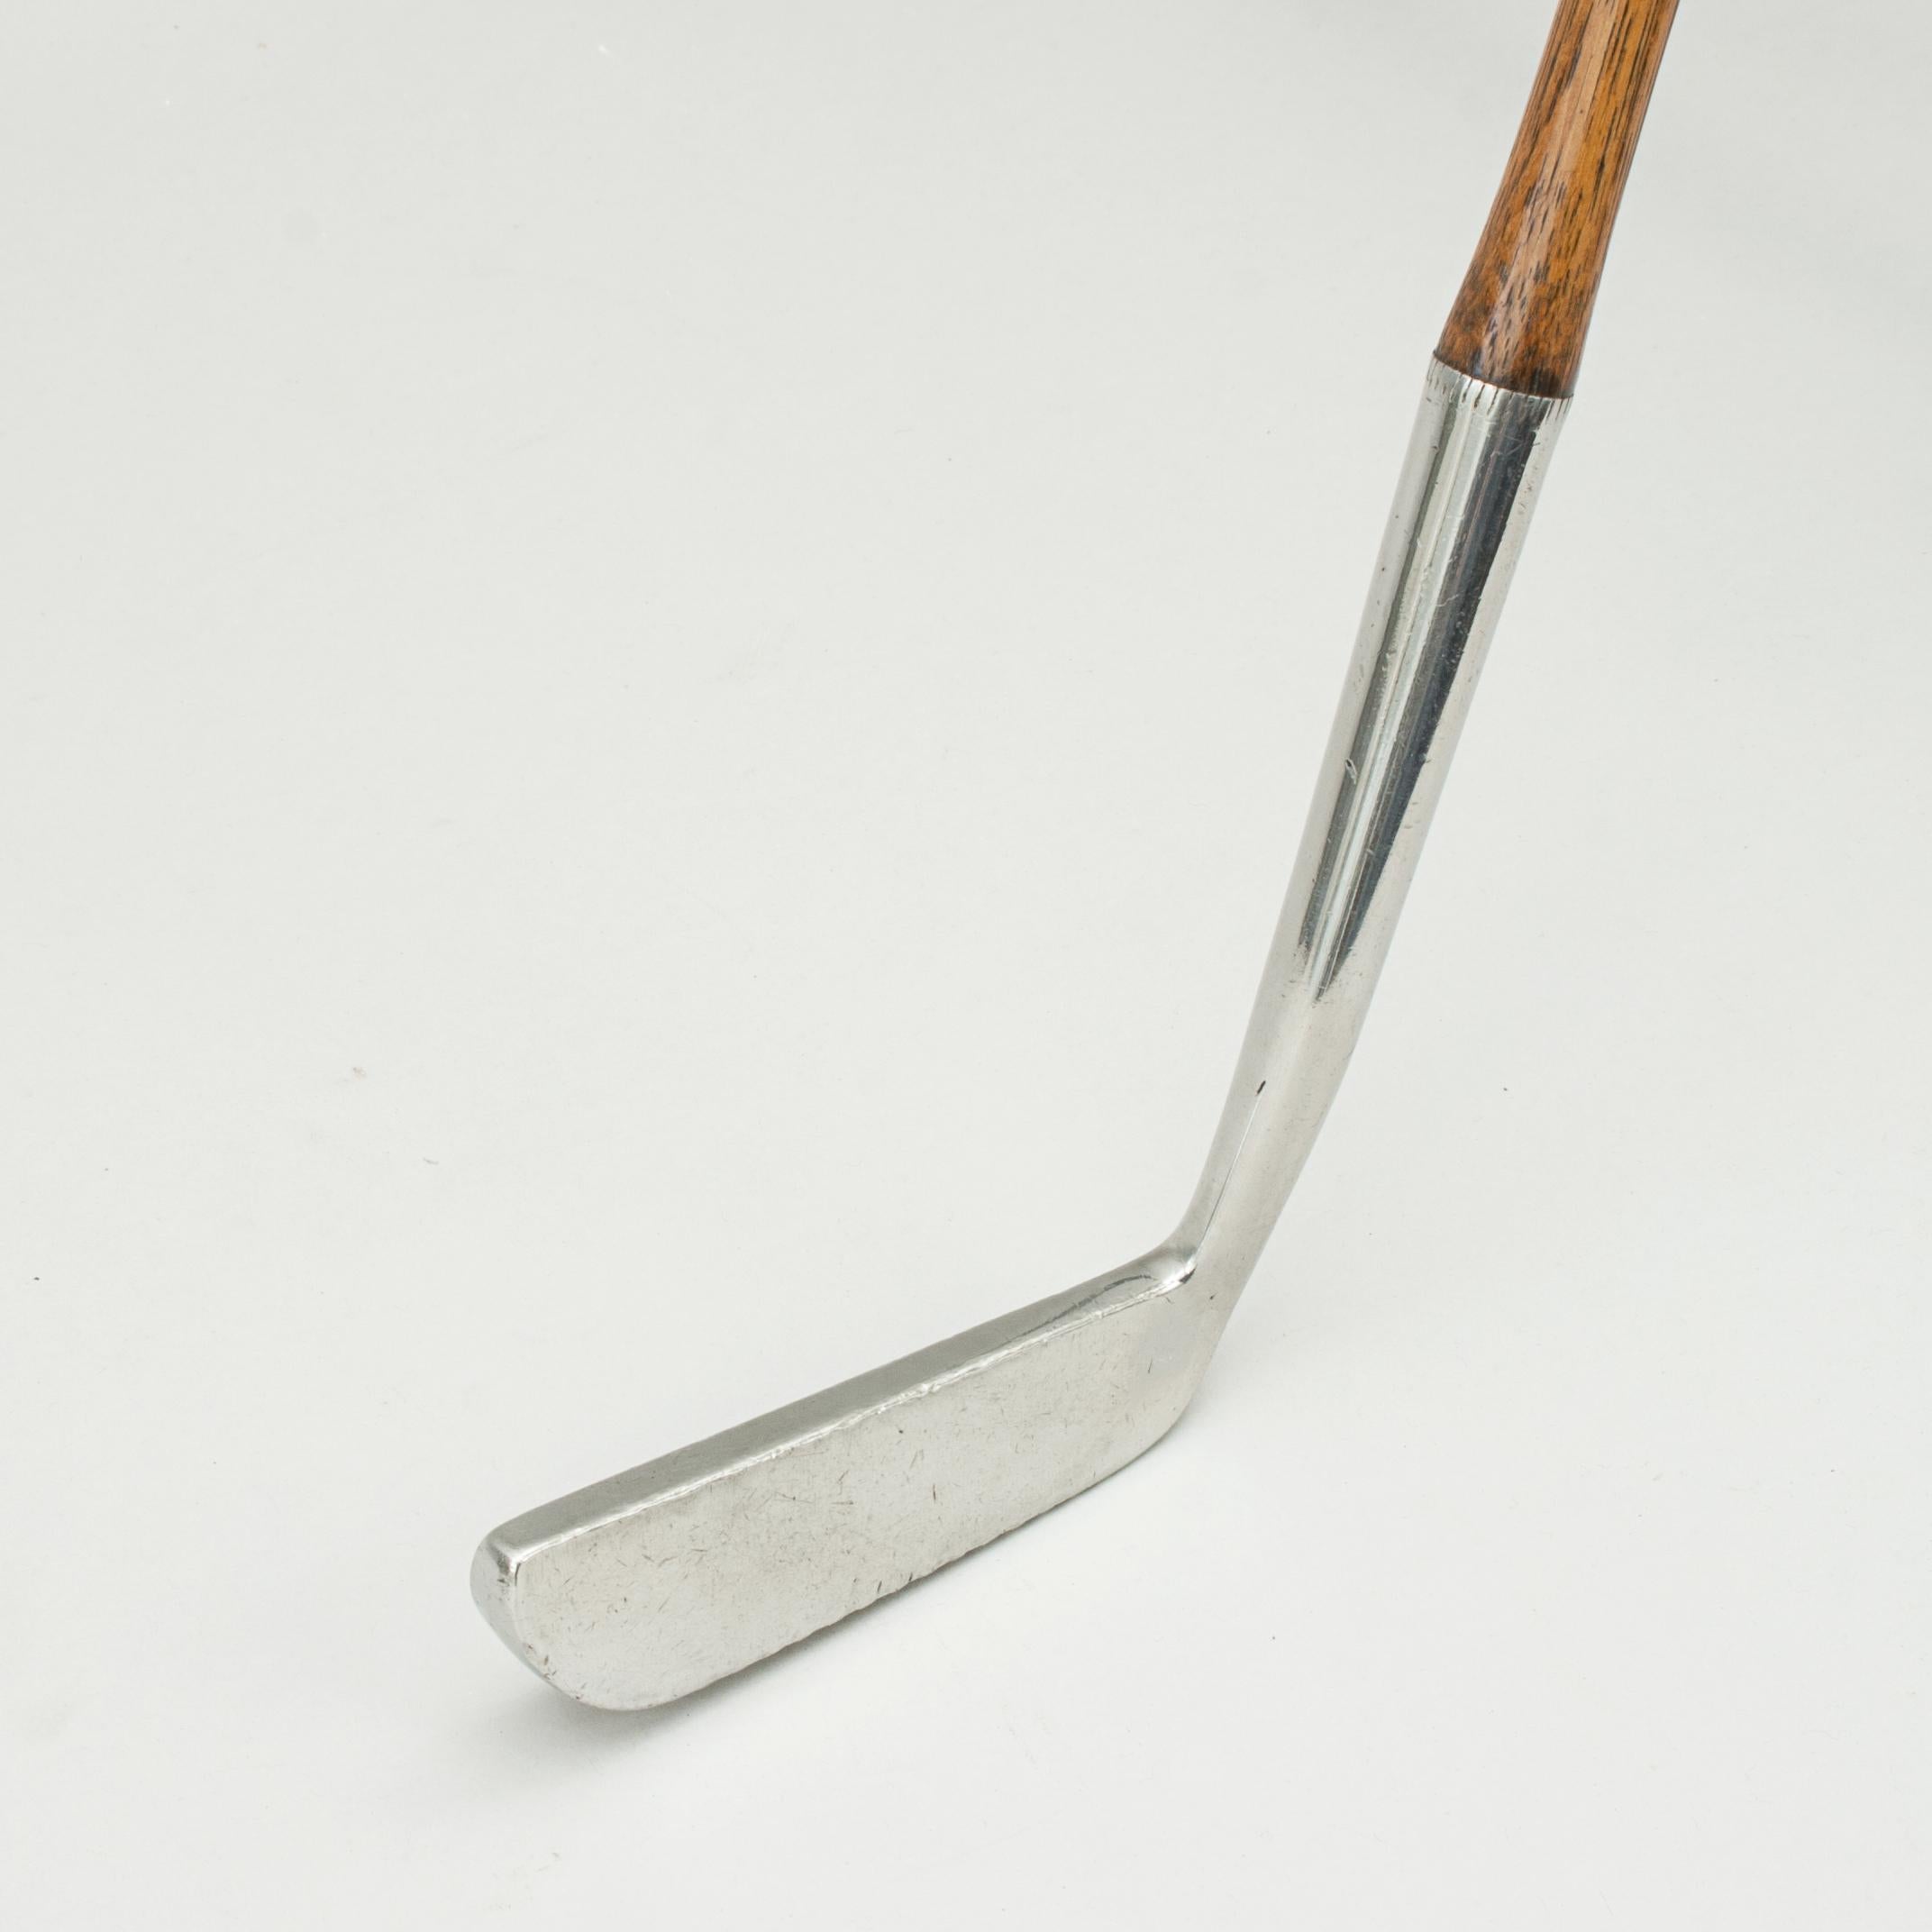 Hickory Shafted Golf Club, Benny Putter, 'Gruvsol', Ben Sayers.
A good original example of a 'Gruvsol' Benny putter made by Ben Sayers, North Berwick. The club with original square hickory shaft stamped 'B. SAYERS' with polished leather grip. It is